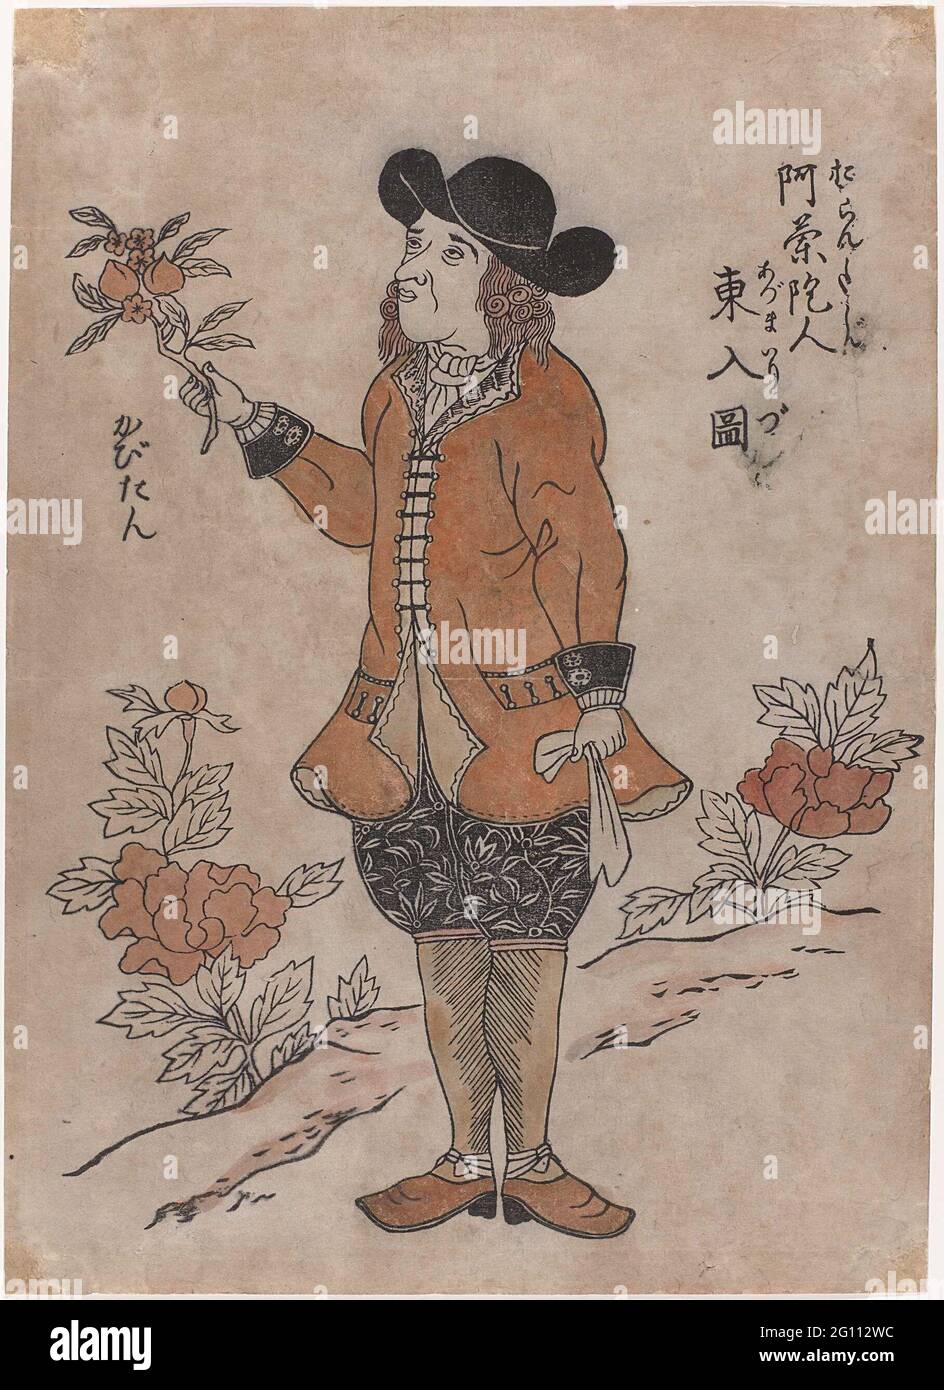 Captain: Hollander who arrived in the east. Nagasakiprent. Man full of (Dutchman) with hat on medium length hair. In his right hand he holds a blossom branch, in the left a handkerchief. Left and right of him inscription in Japanese characters and two large flower branches. Coat and floral orange-brown colored; hair and stockings beige-brown colored. Inscription; l.: 'Kapitan'. R.: 'Orand Jin Azuma Iri No Zu' (in Japanese characters). Nagasaki-e. Stock Photo